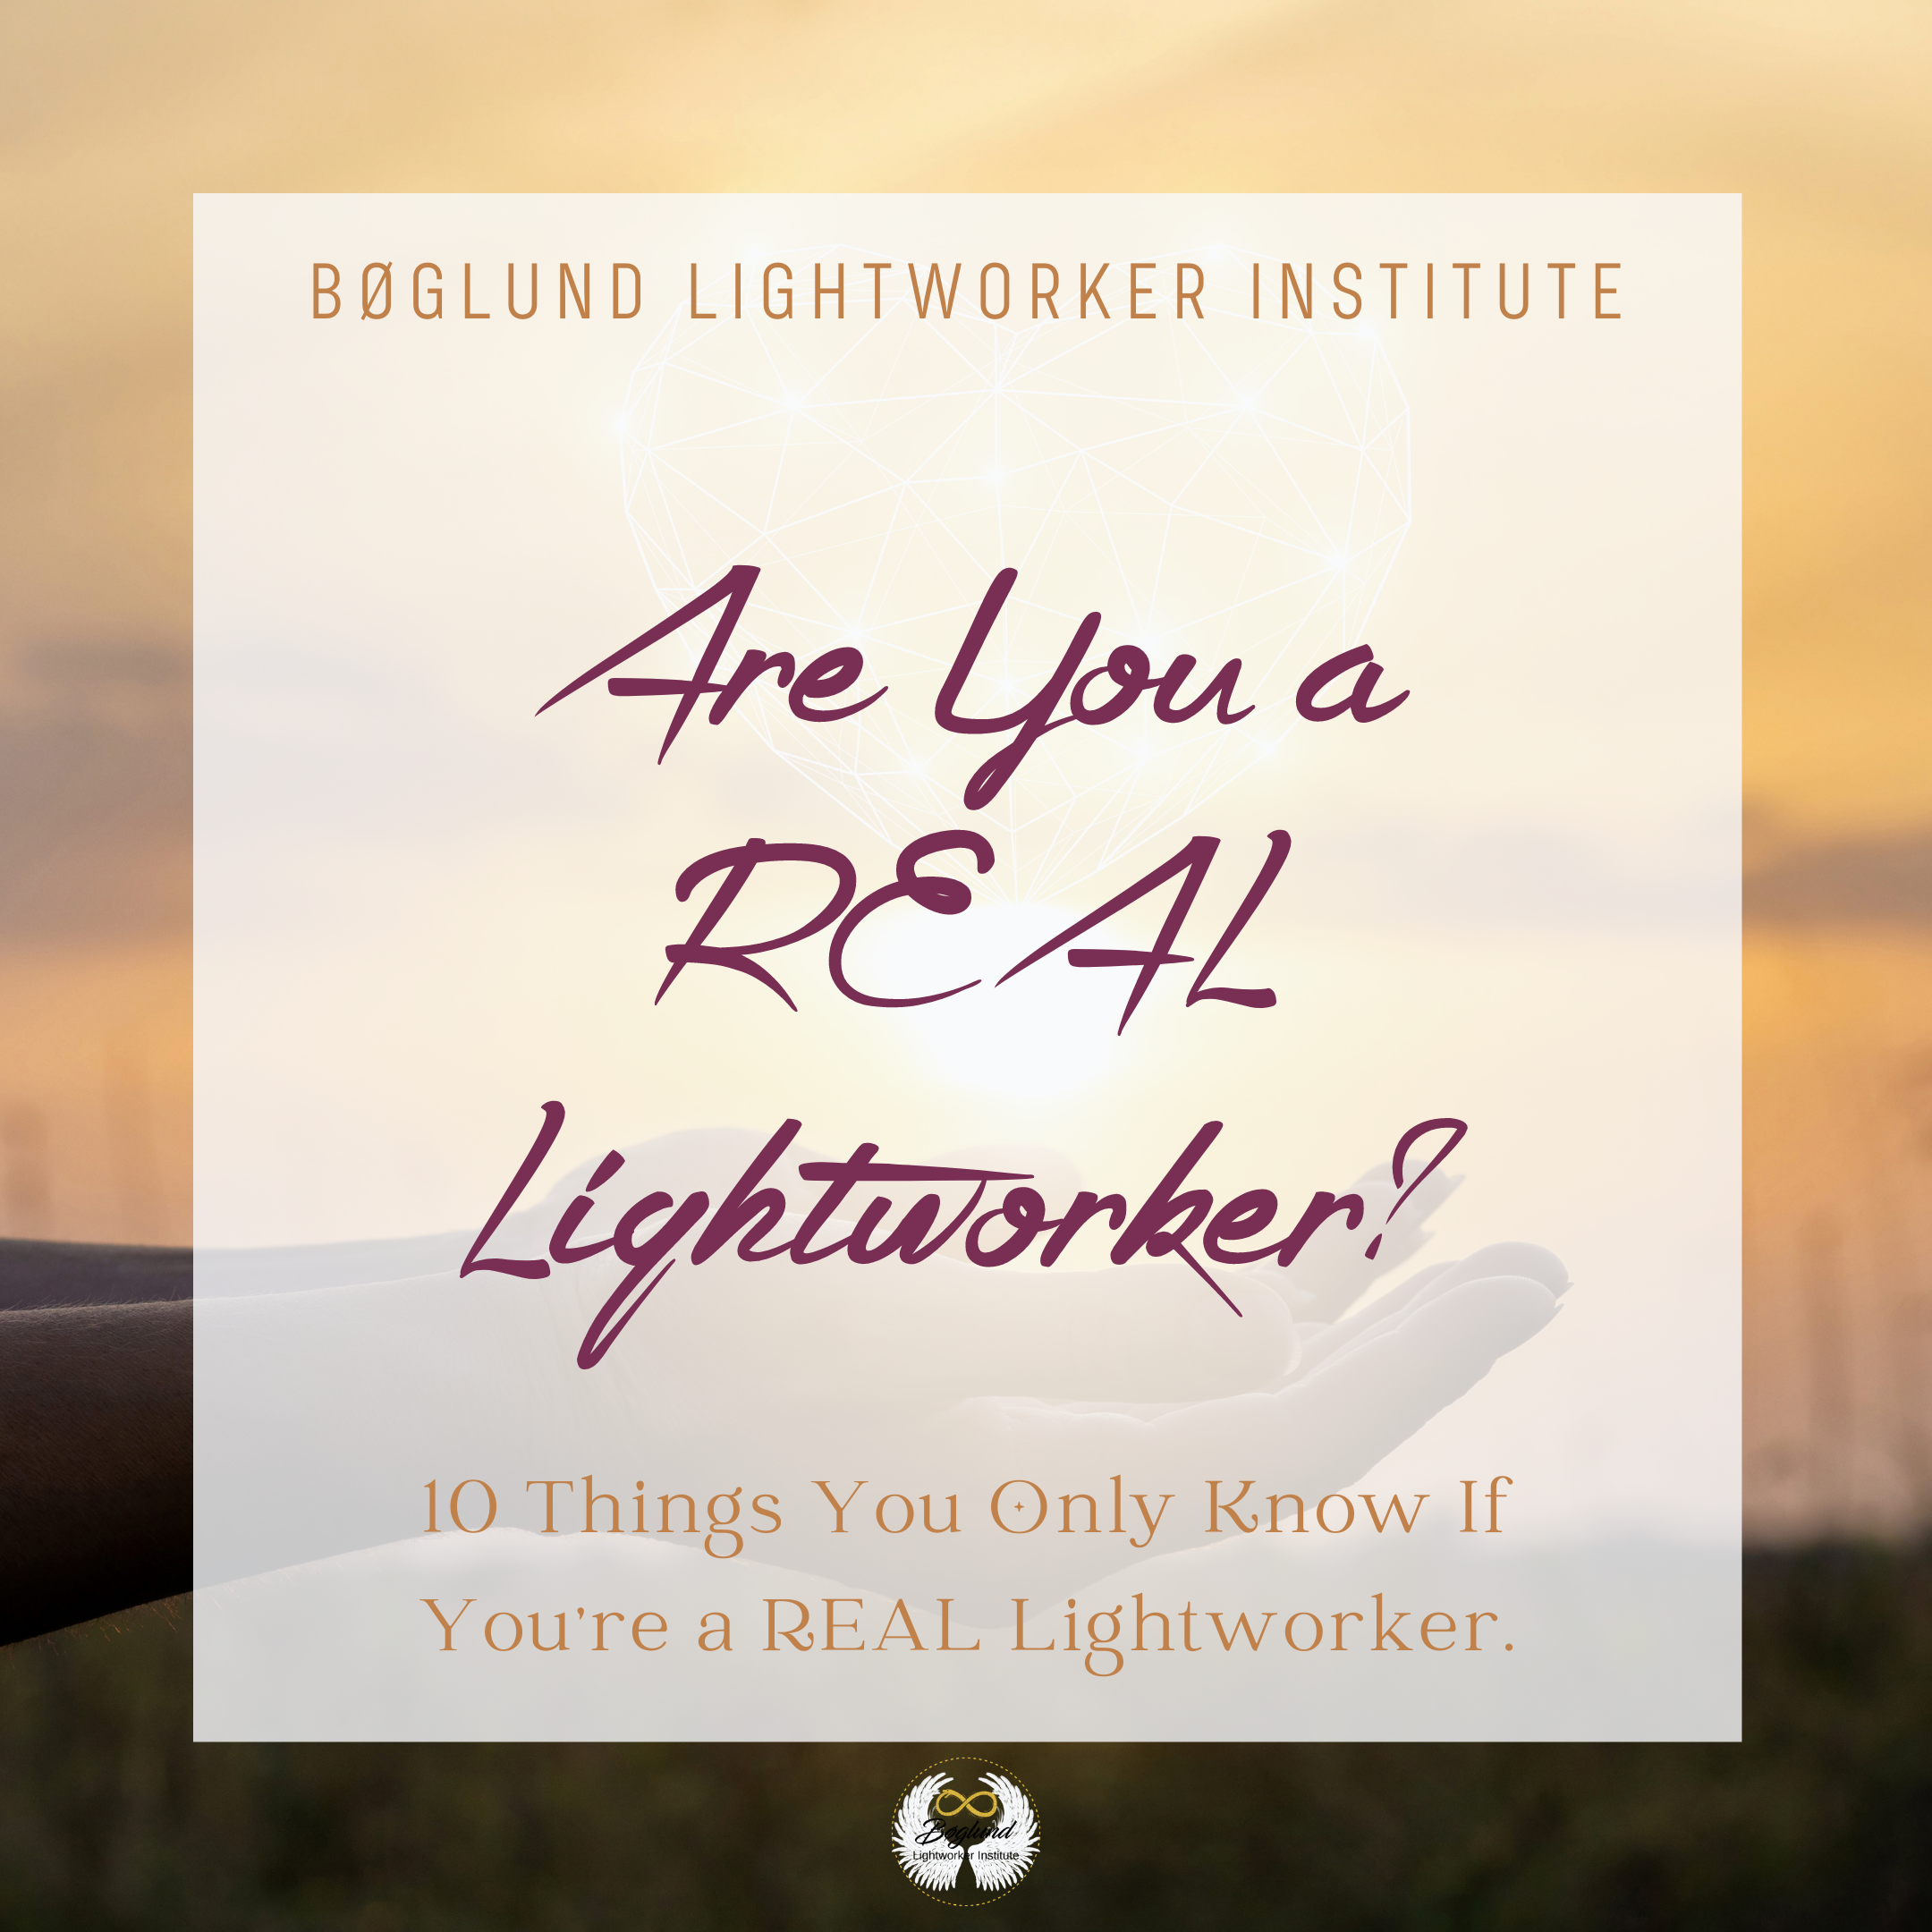 Are You a REAL Lightworker?